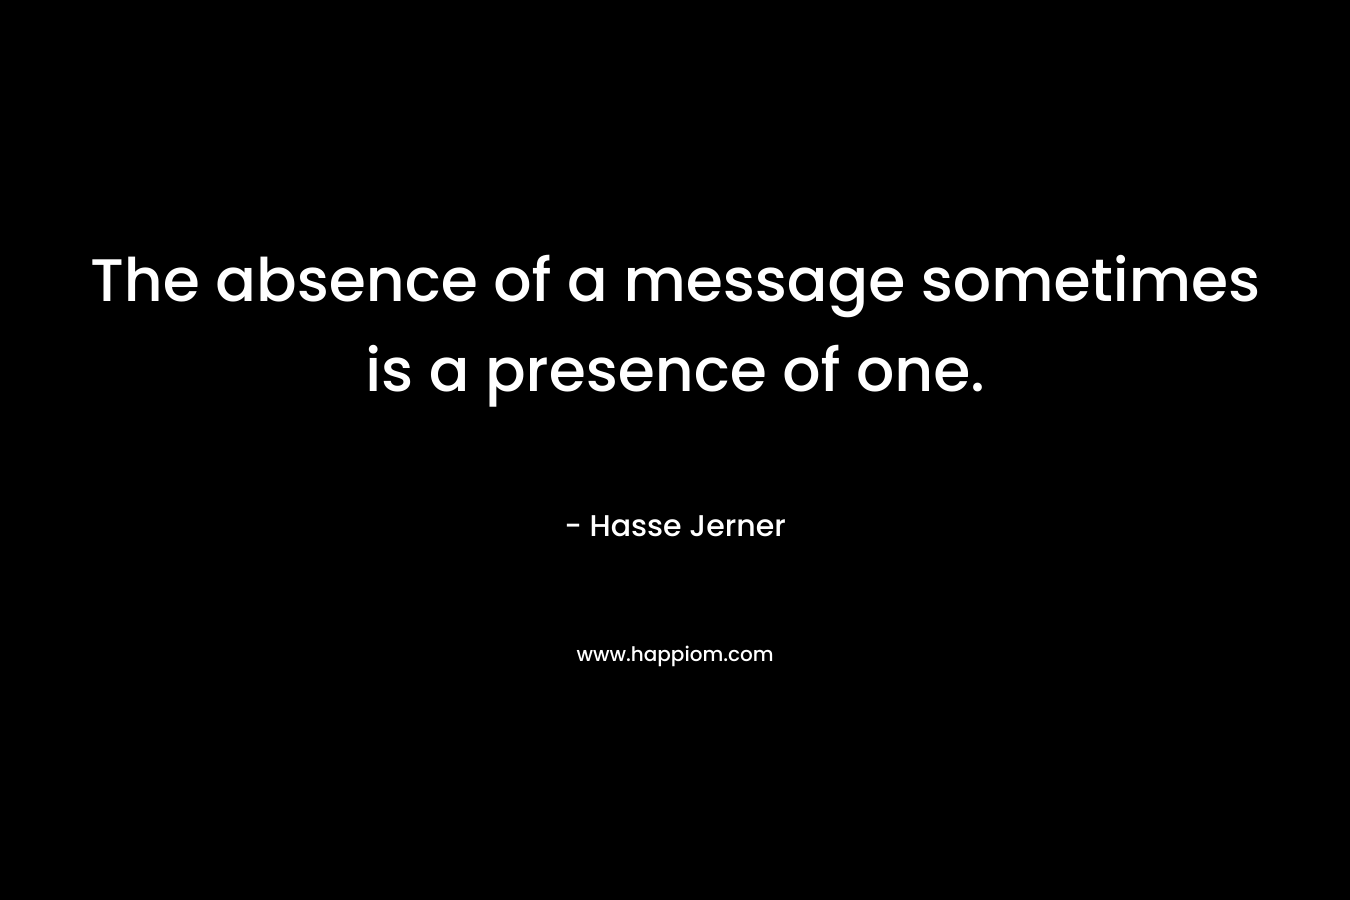 The absence of a message sometimes is a presence of one.